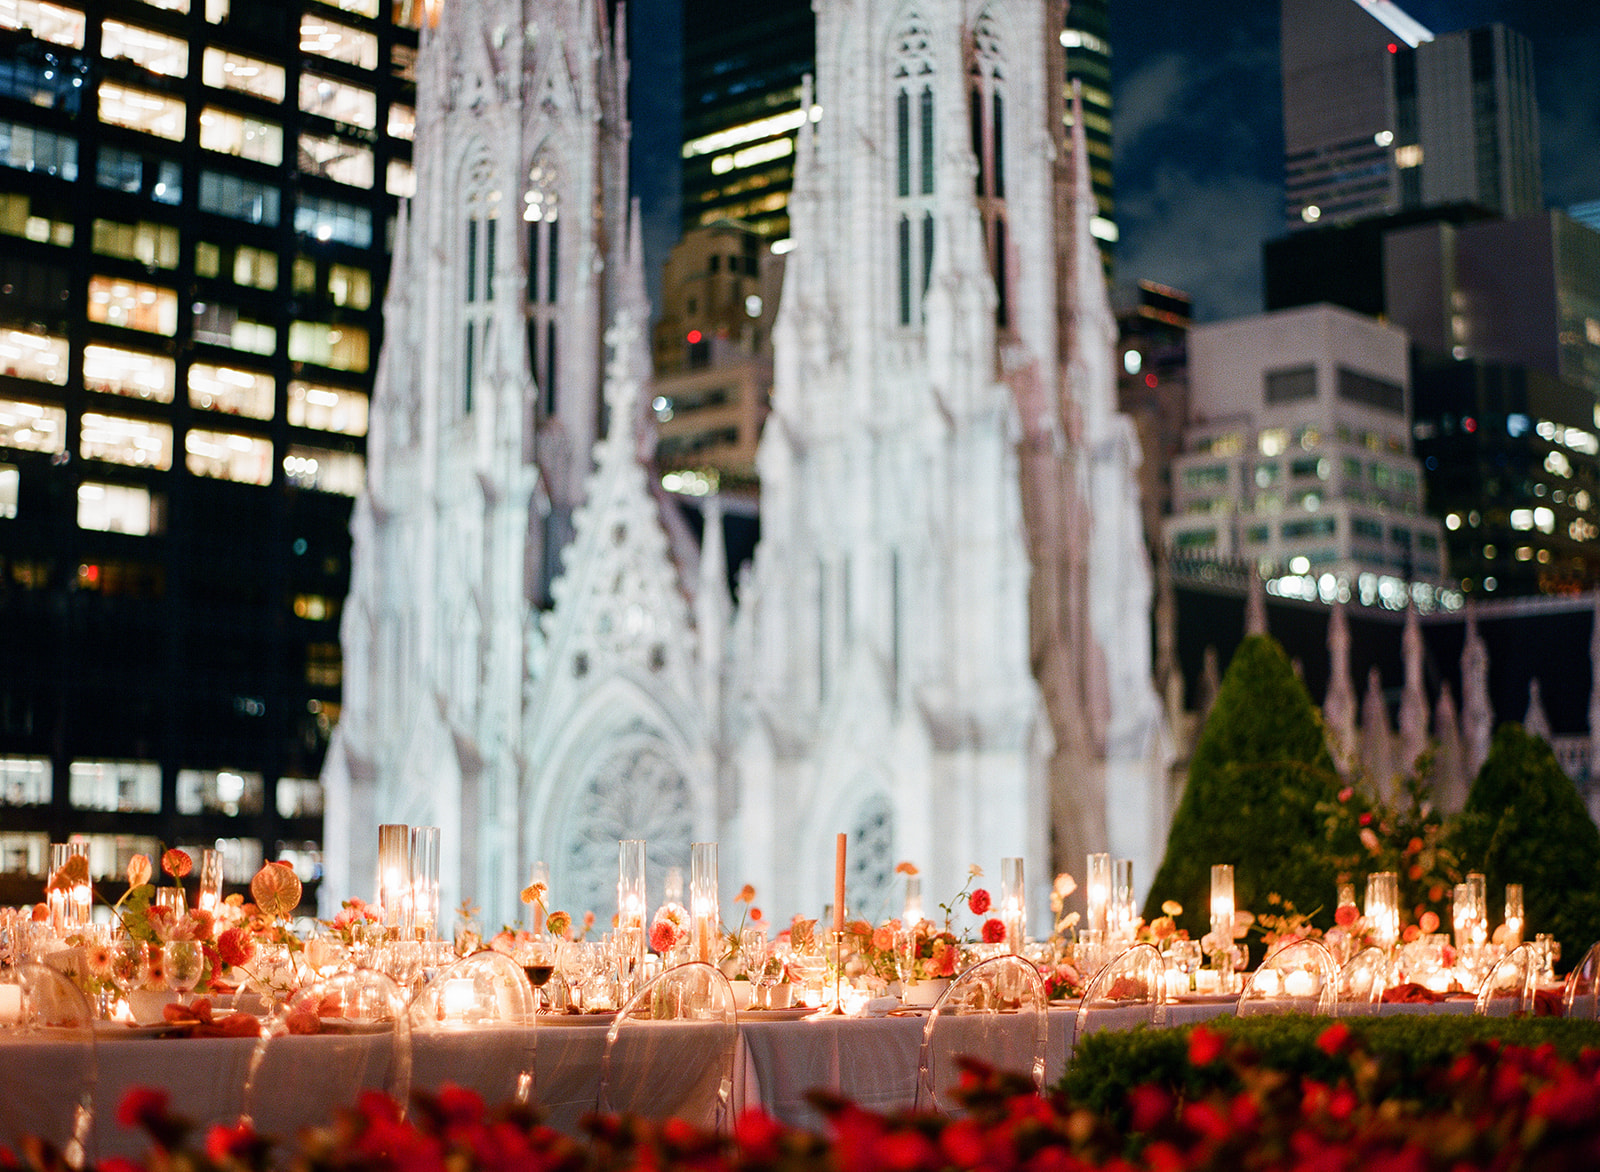 st. patrick's cathedral in new york city with wedding reception tables by candlelight after summer wedding